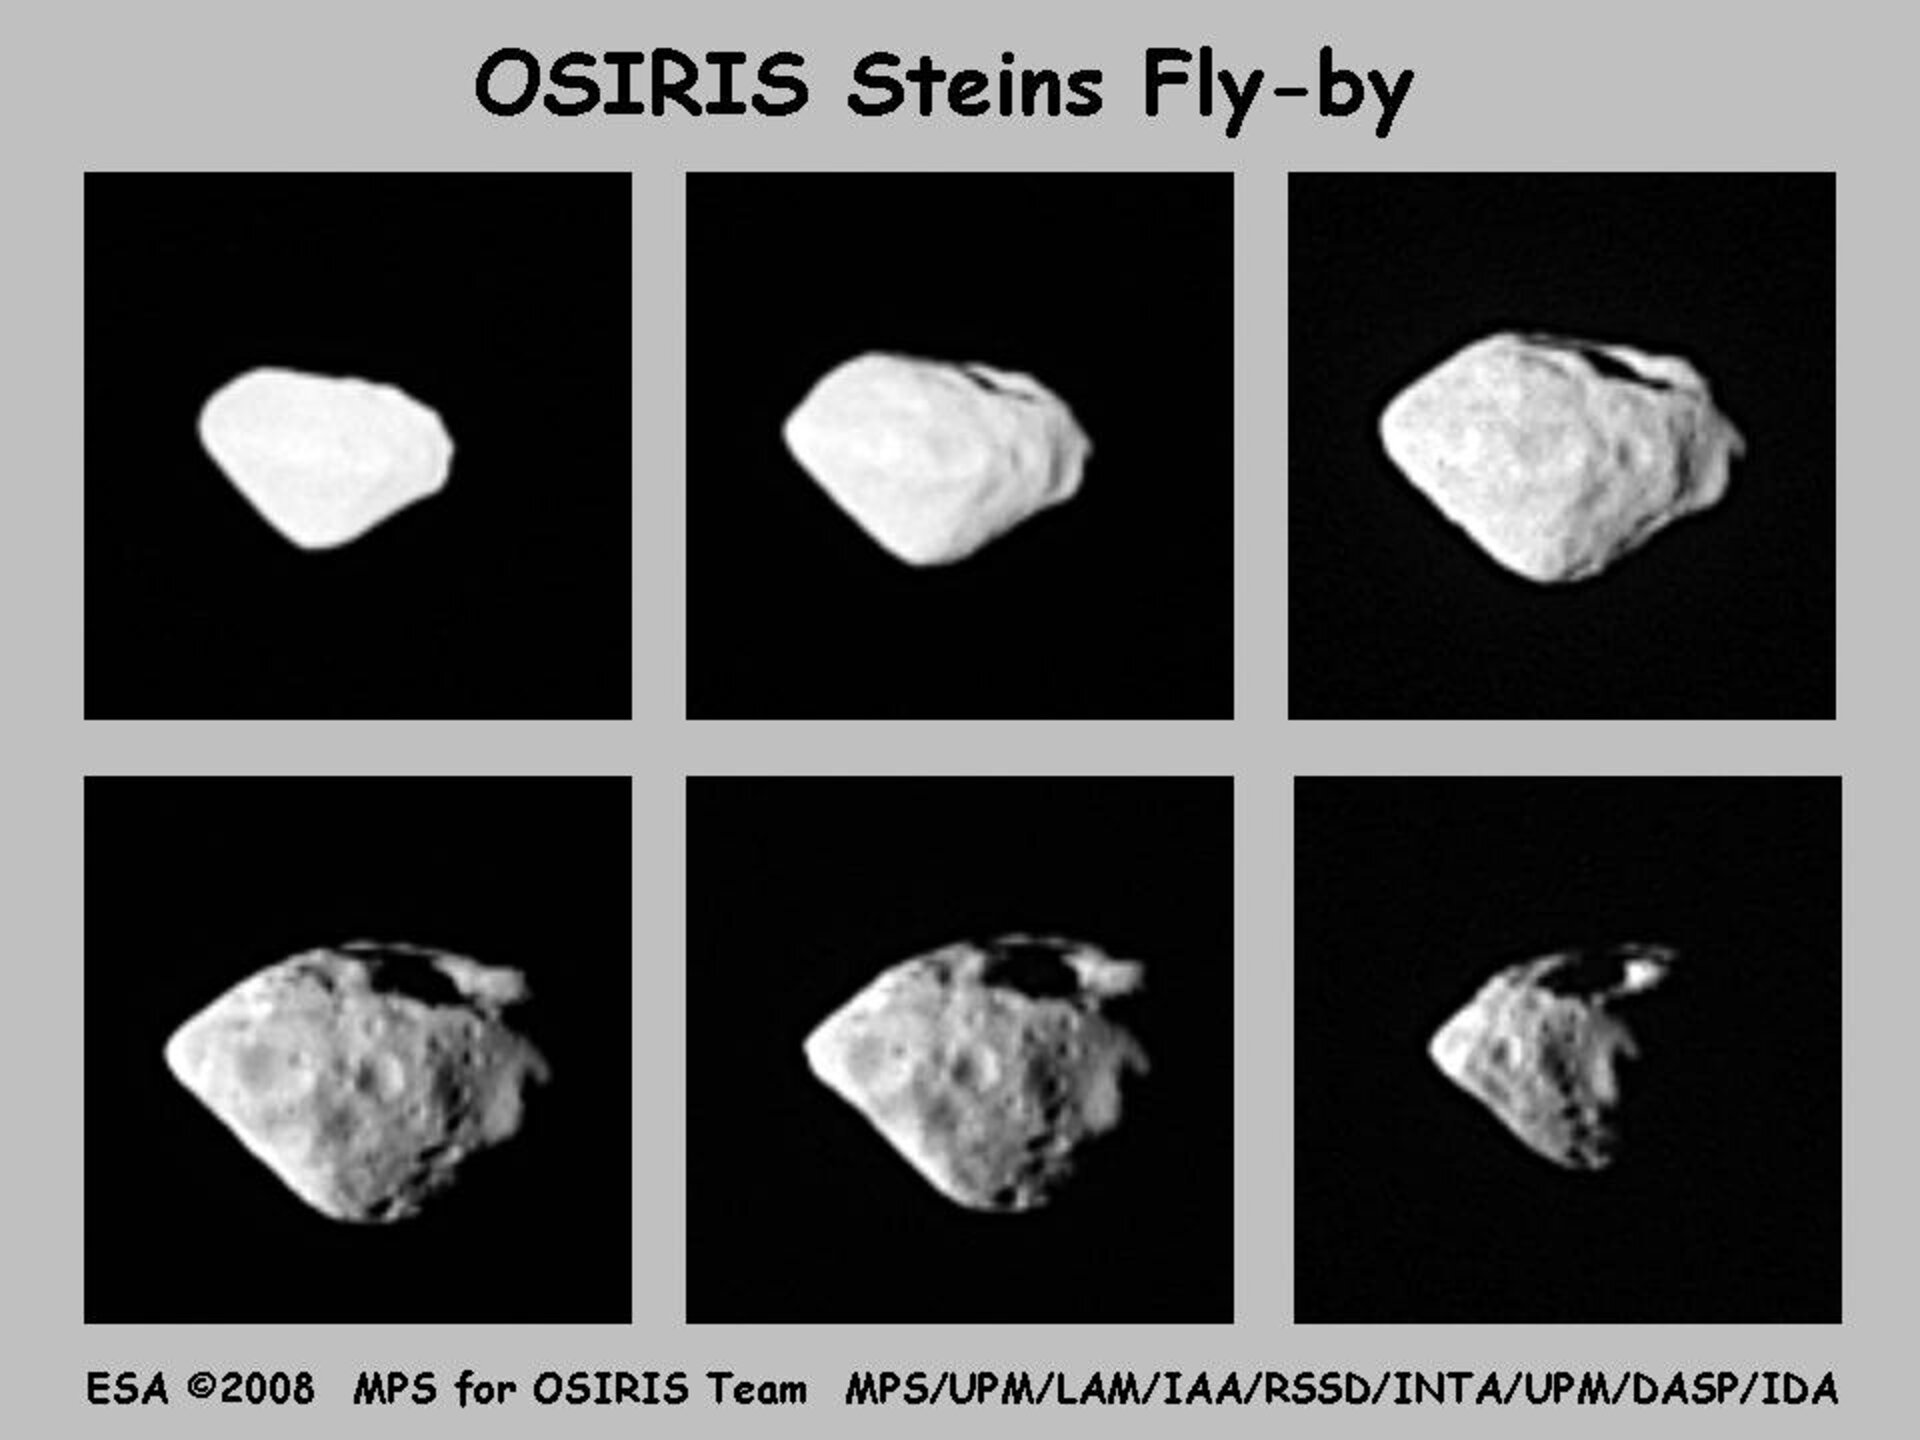 Asteroid Steins: A diamond in space